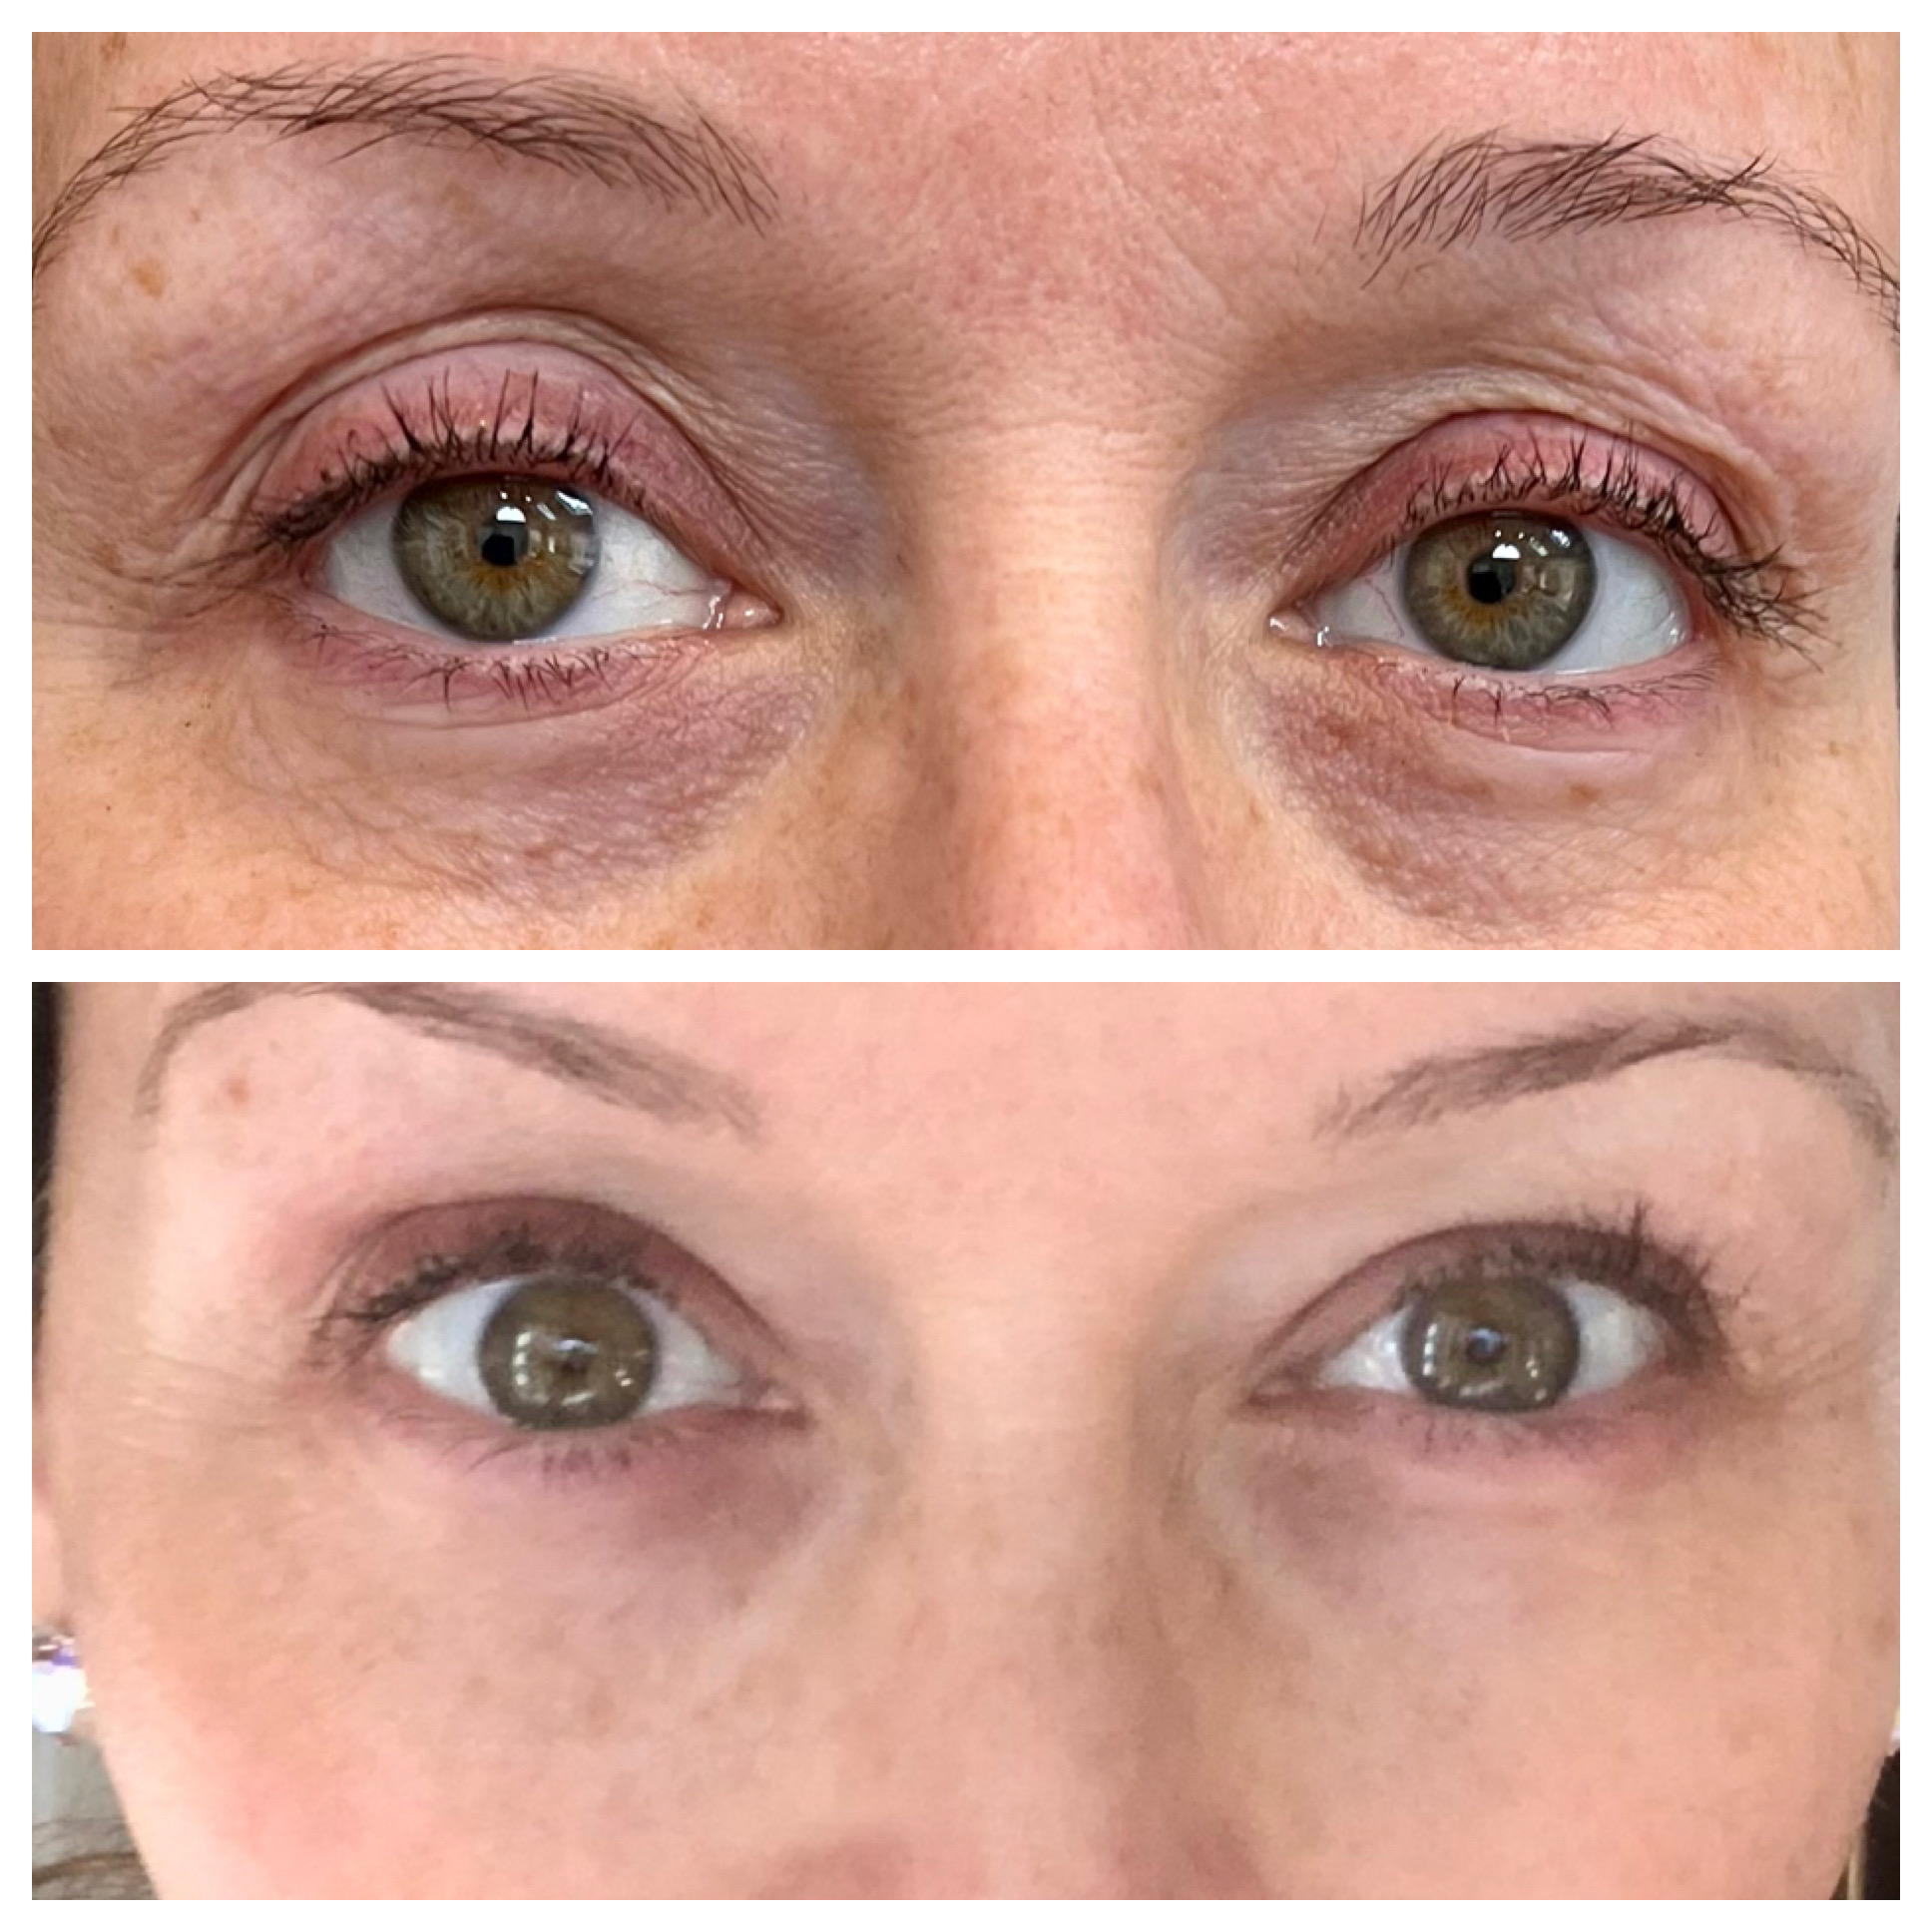 NeoGen Plasma- Non-Surgical Blepharoplasty before & after treatment photos in Leominster, MA | Opulent Aesthetics and Wellness